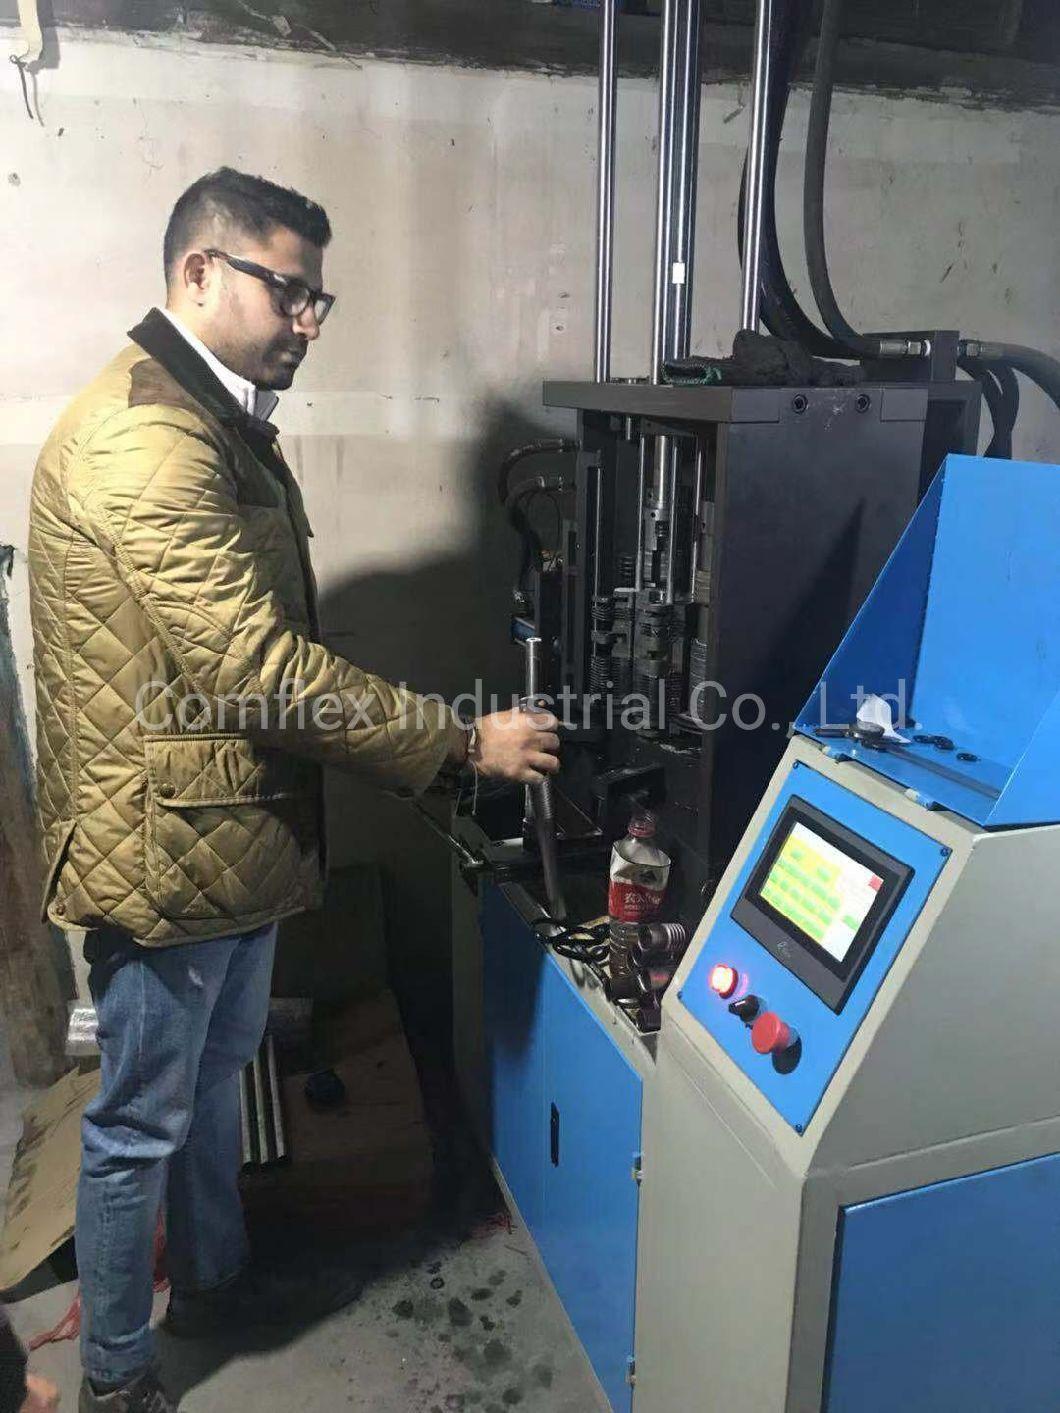 Automatic Hydroforming Multi Ply Bellow Forming Making Machine Equipment^